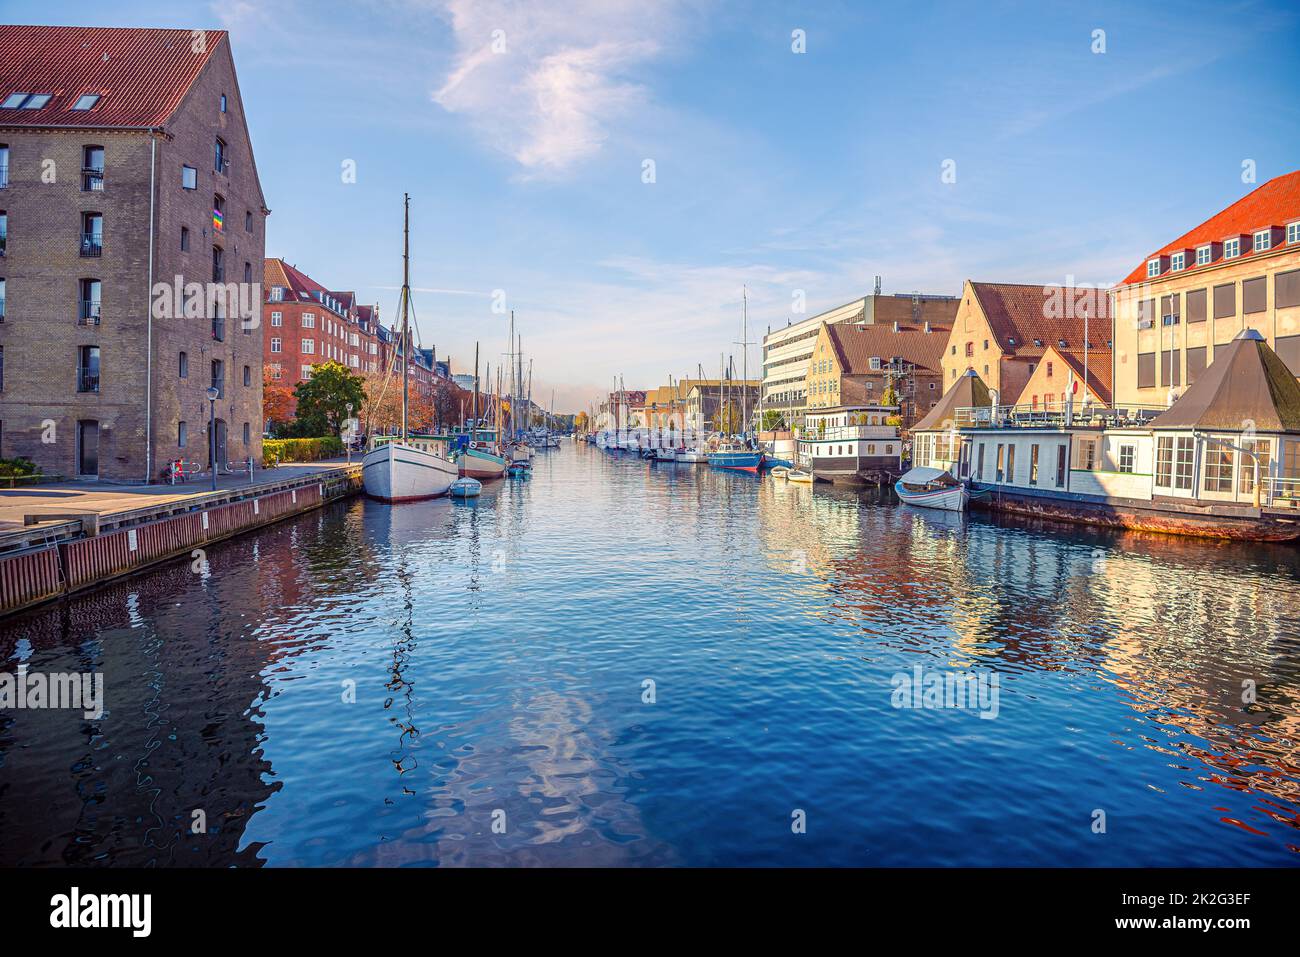 River canal with many boats and ships with small old houses in the  neighbourhood area Christianshavn in Copenhagen, Denmark Stock Photo